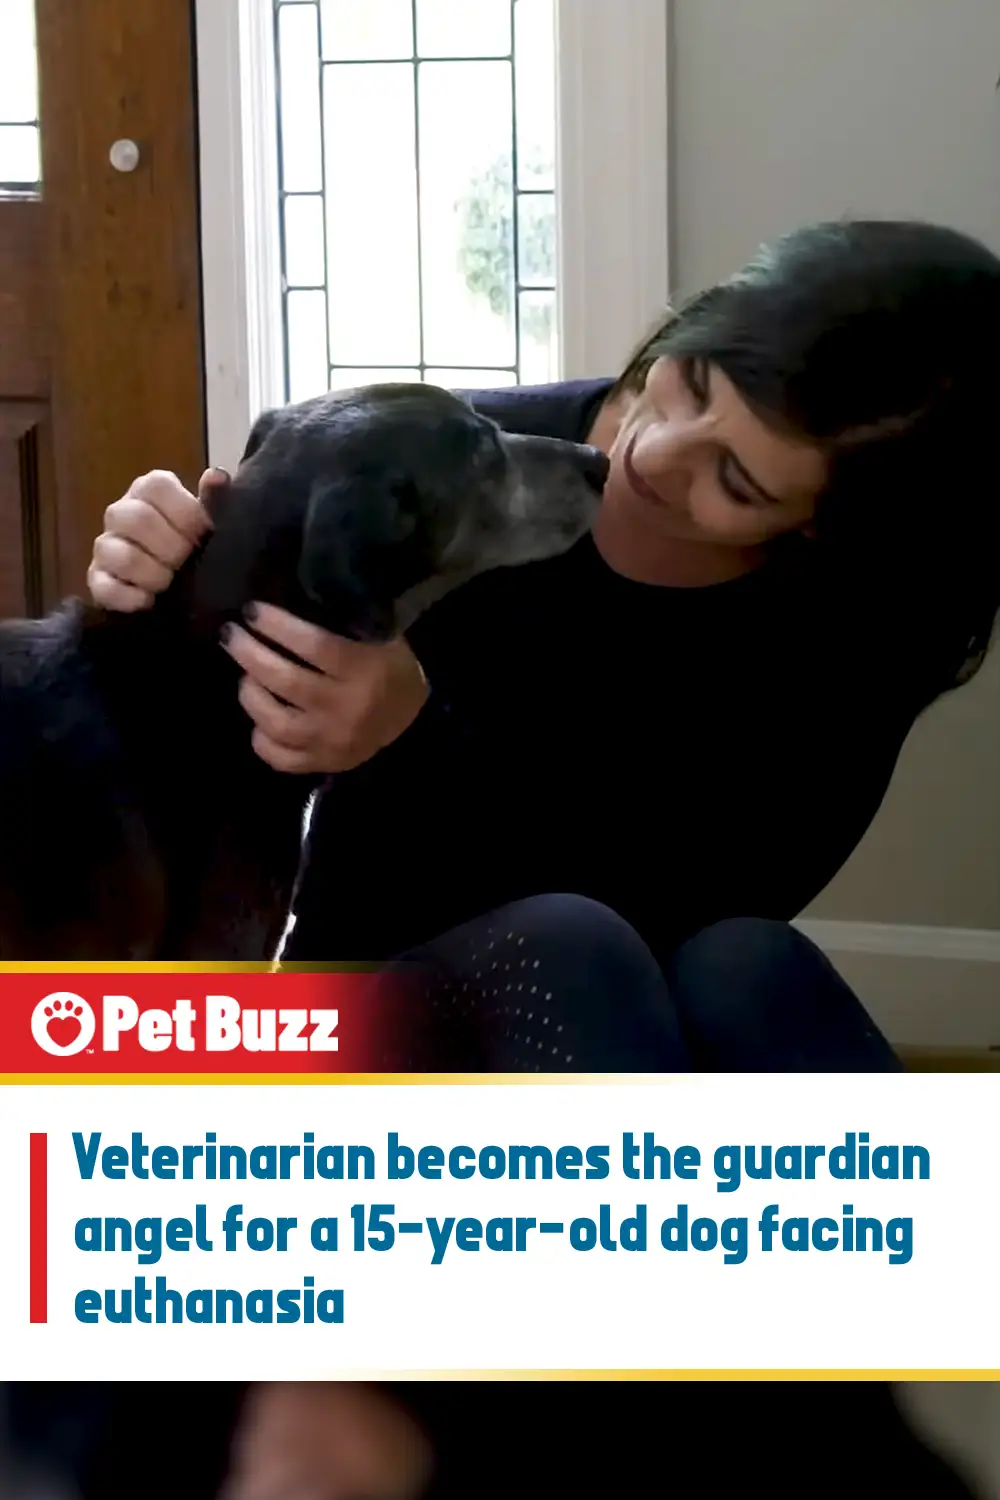 Veterinarian becomes the guardian angel for a 15-year-old dog facing euthanasia